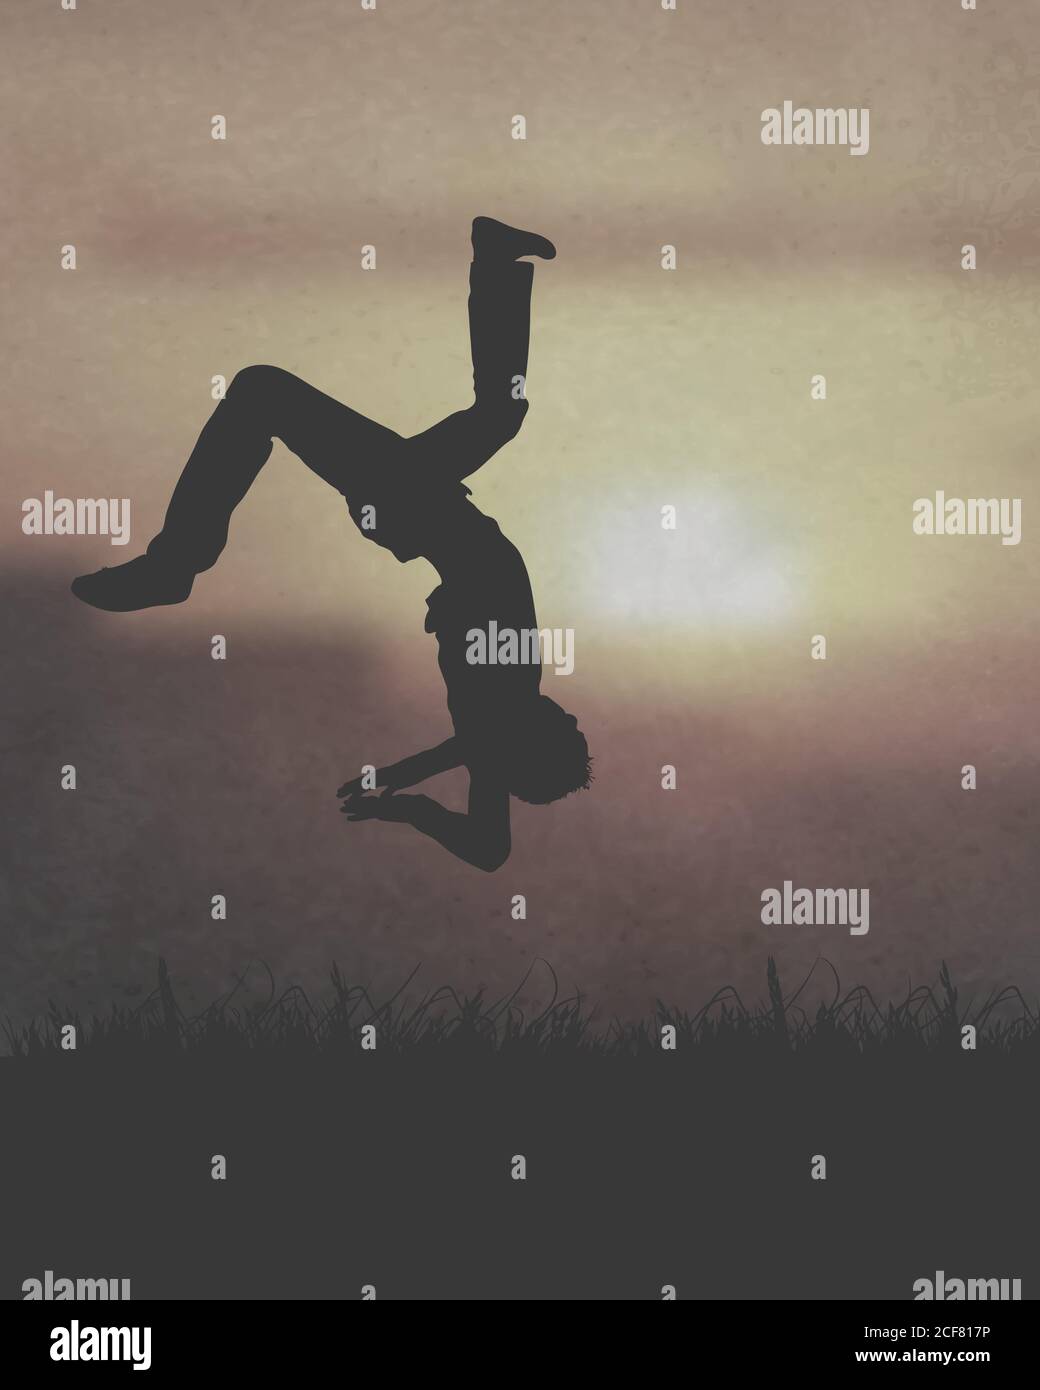 A Man Somersaulting Under The Sunset Illustration Stock Vector